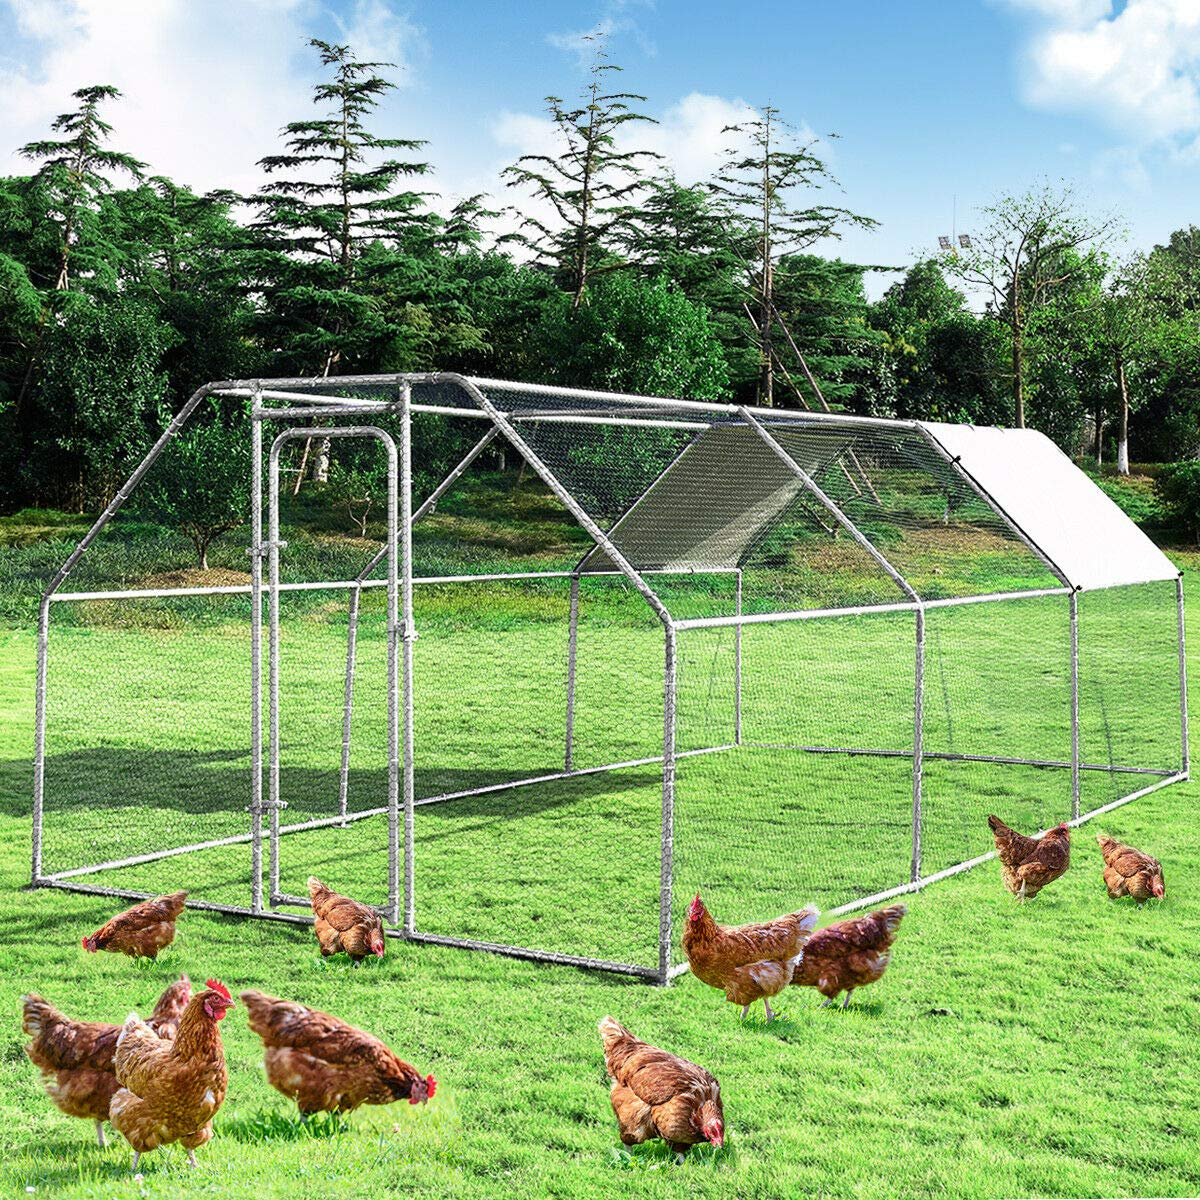 Giantex Large Metal Chicken Coop Walk-in Chicken Coops Hen Run House Shade Cage with Waterproof and Anti-Ultraviolet Cover for Outdoor Backyard